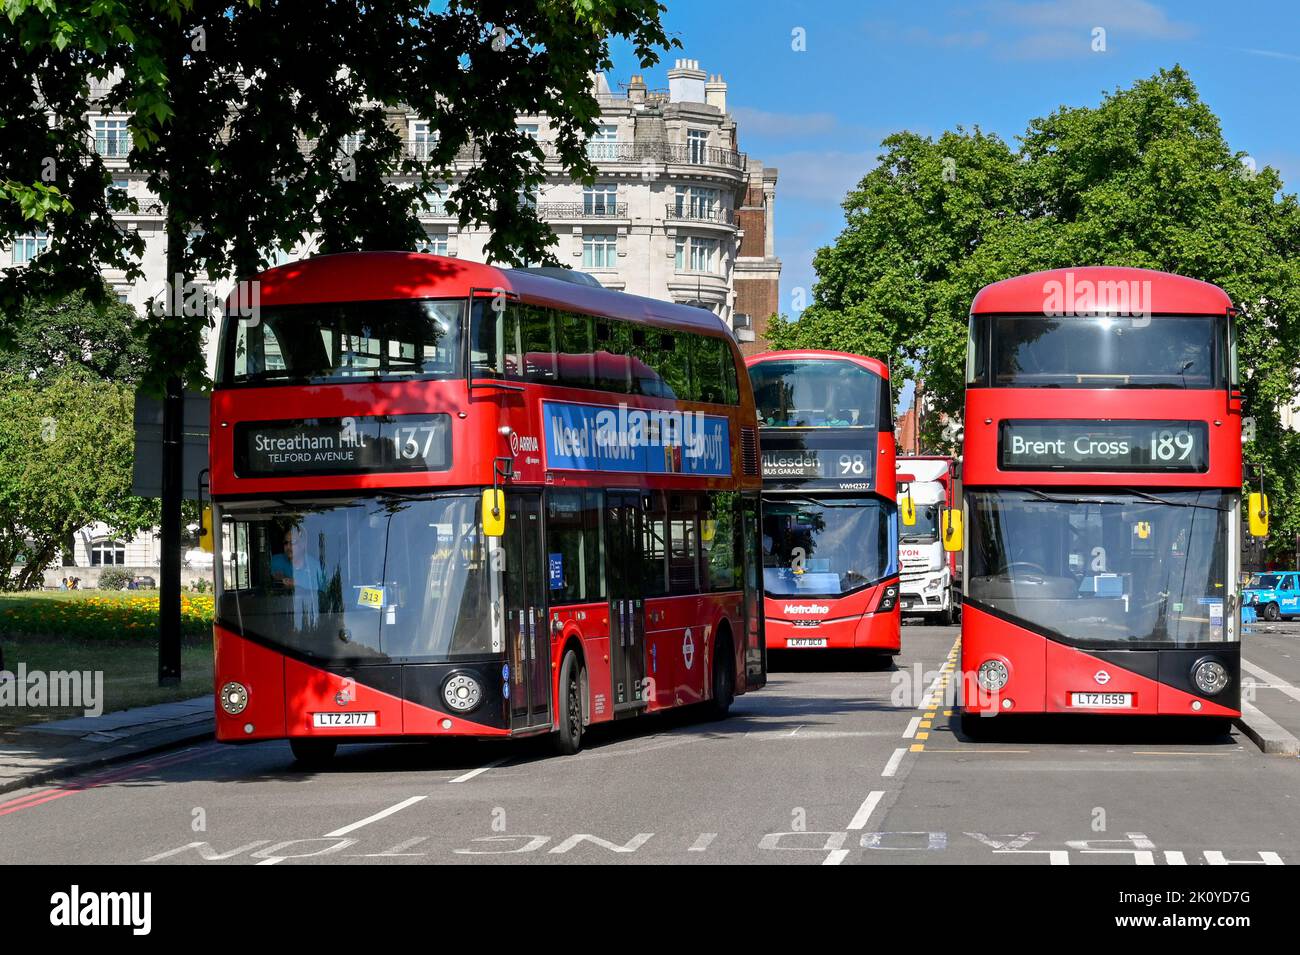 London, United Kingdom - June 2022: Red London double decker buses driving on a street in central London Stock Photo